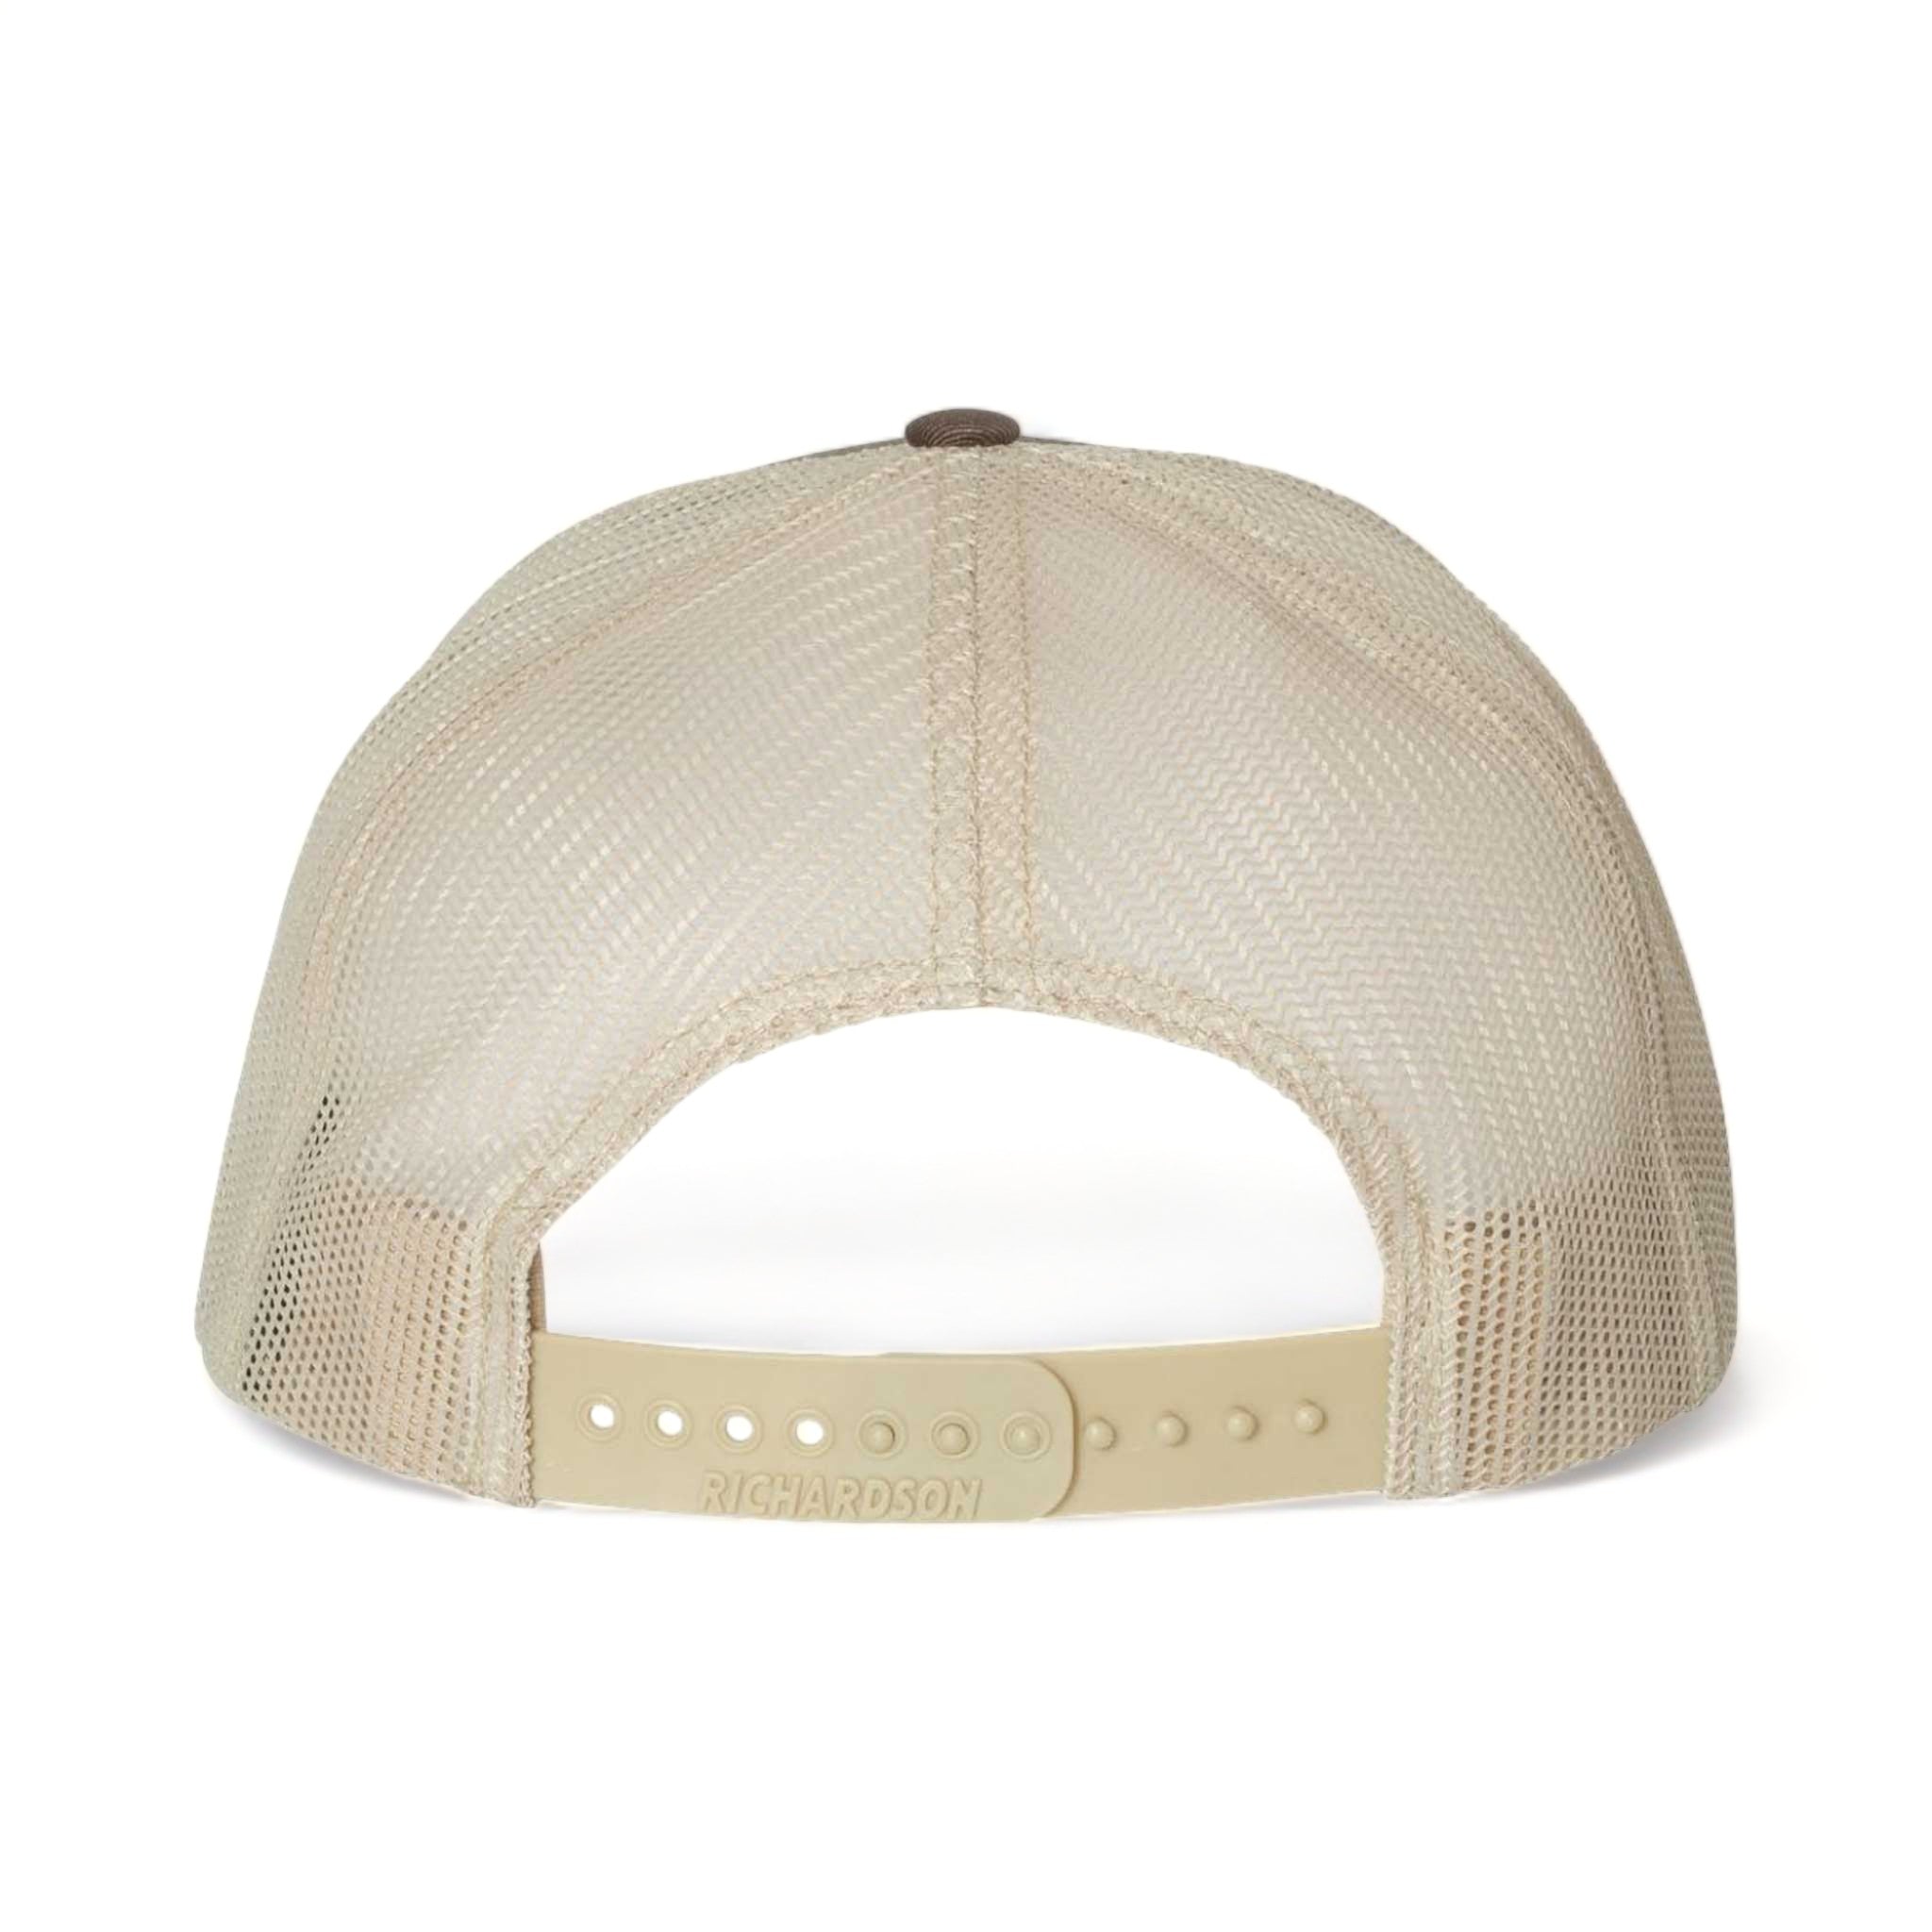 Back view of Richardson 112 custom hat in brown and khaki